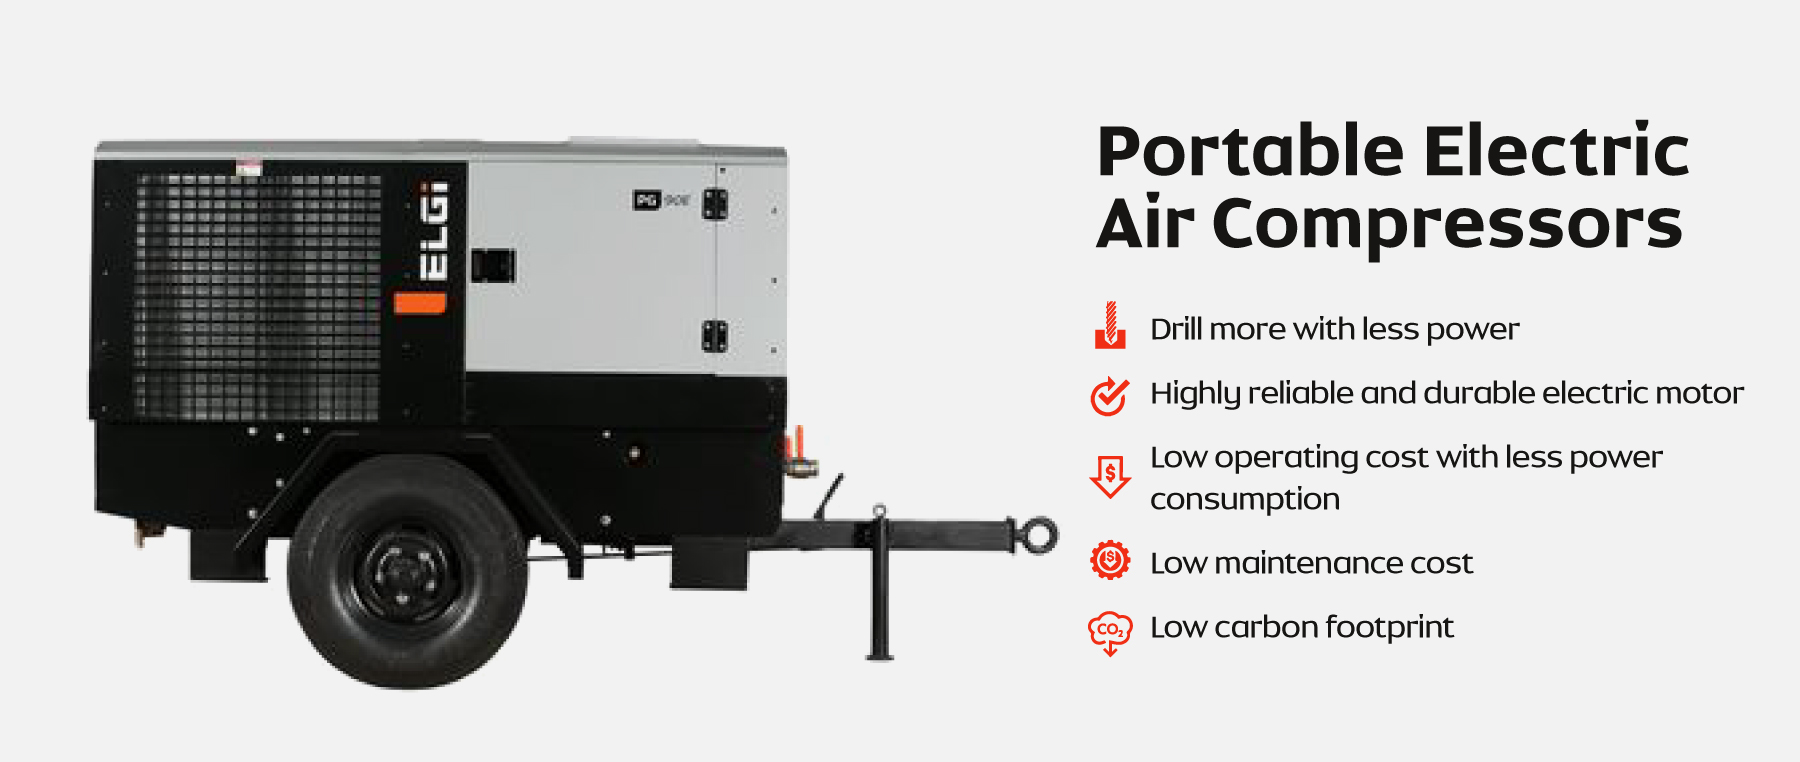 Portable Electric Air Compressors – versatile machines for mining applications